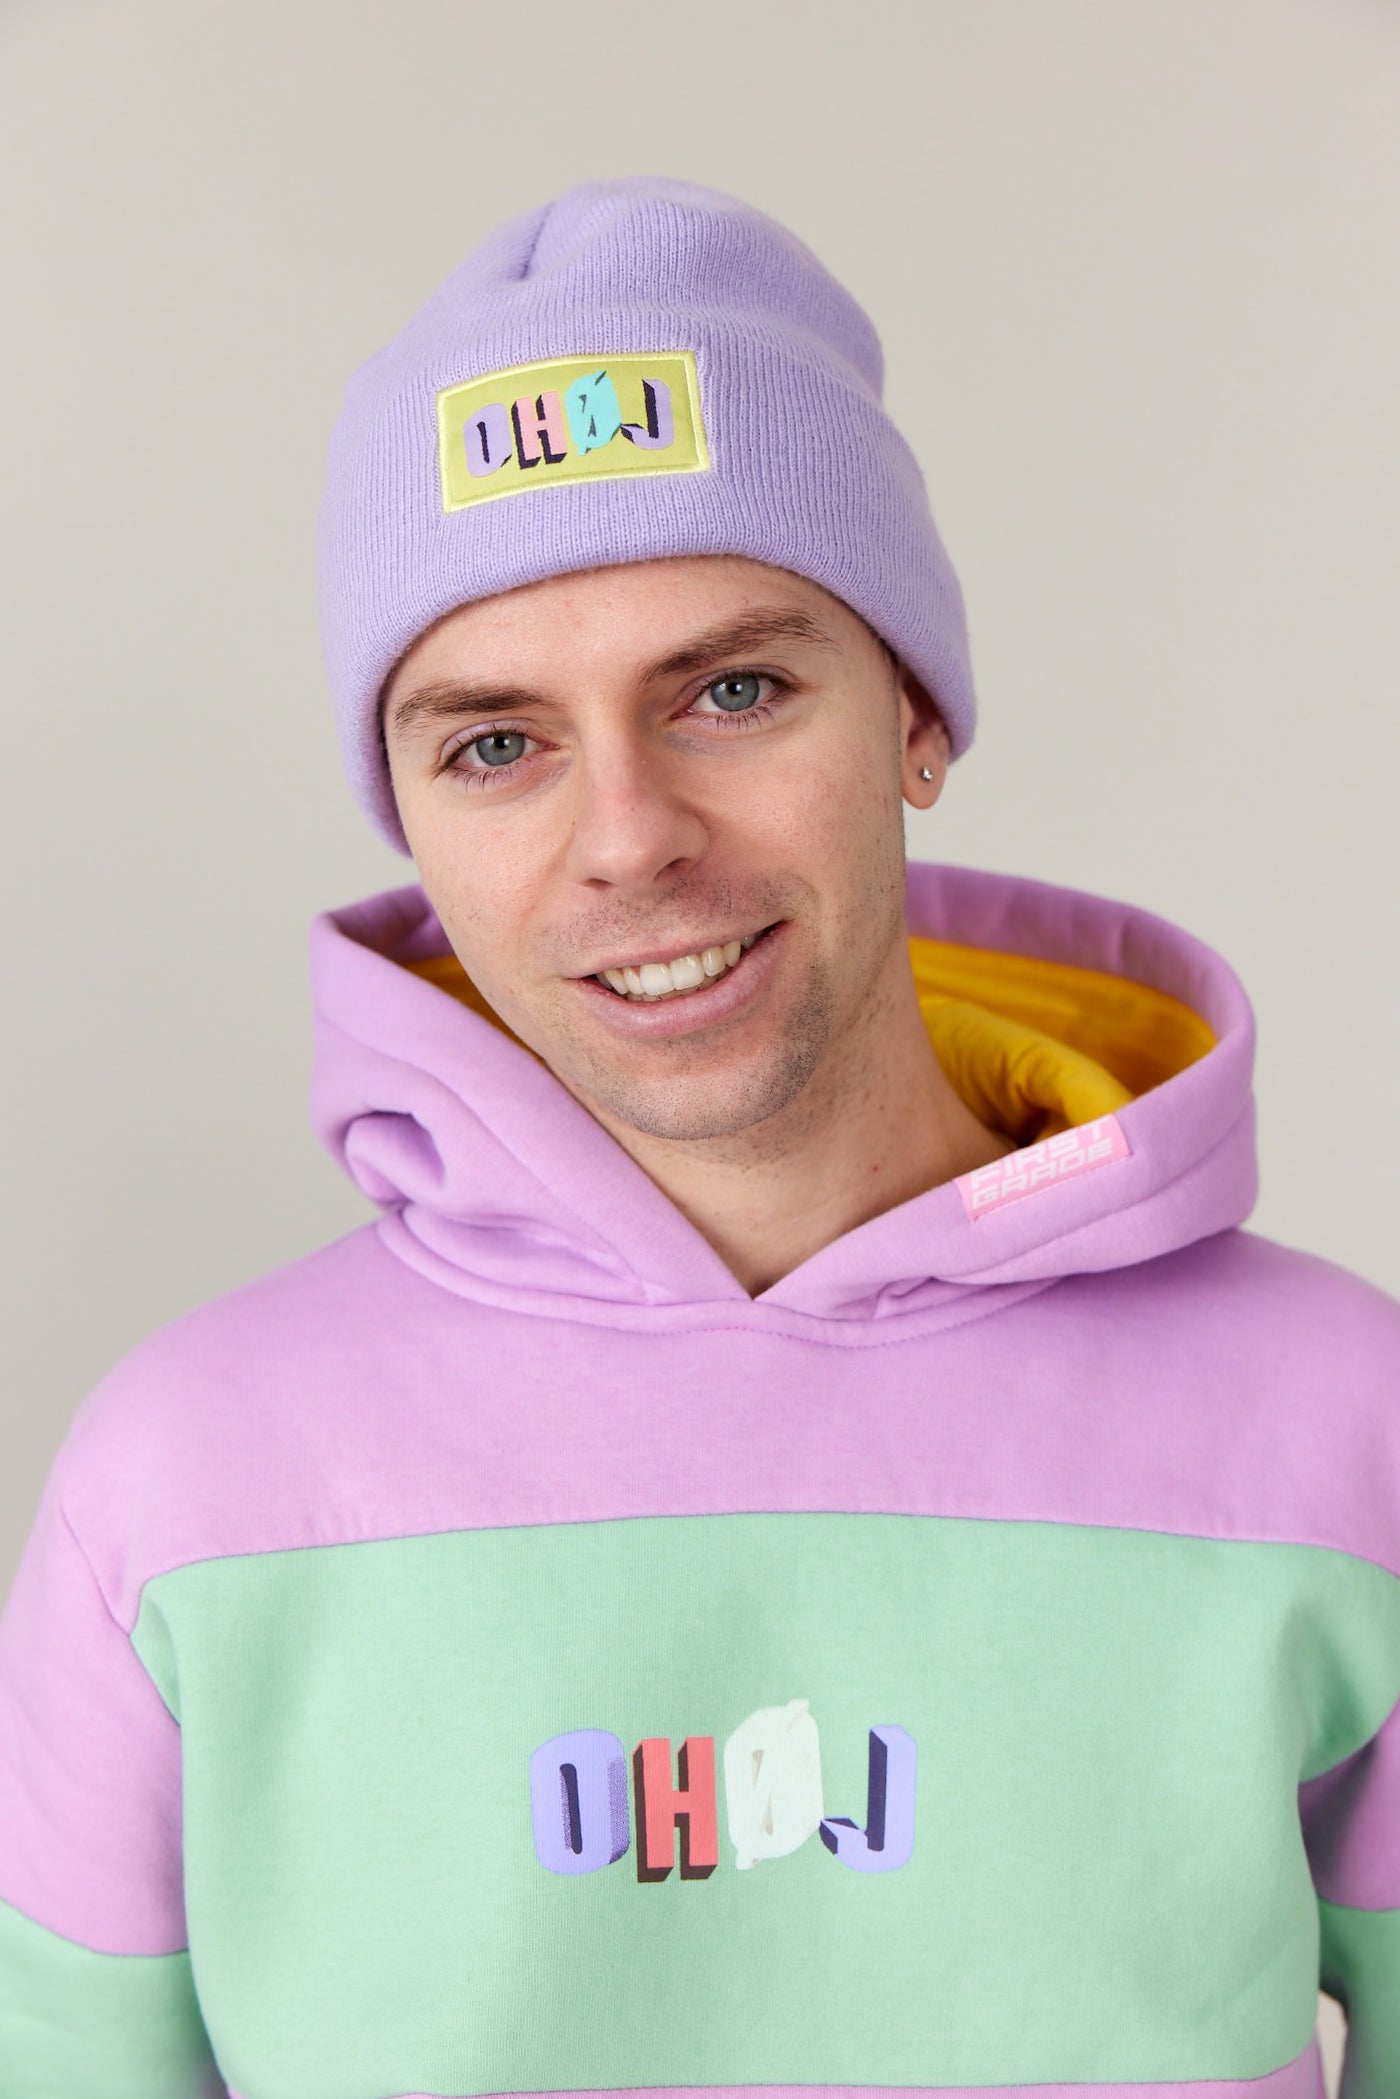 "OHHJ" - COLORFUL - Set (3 parts) + Free Hat